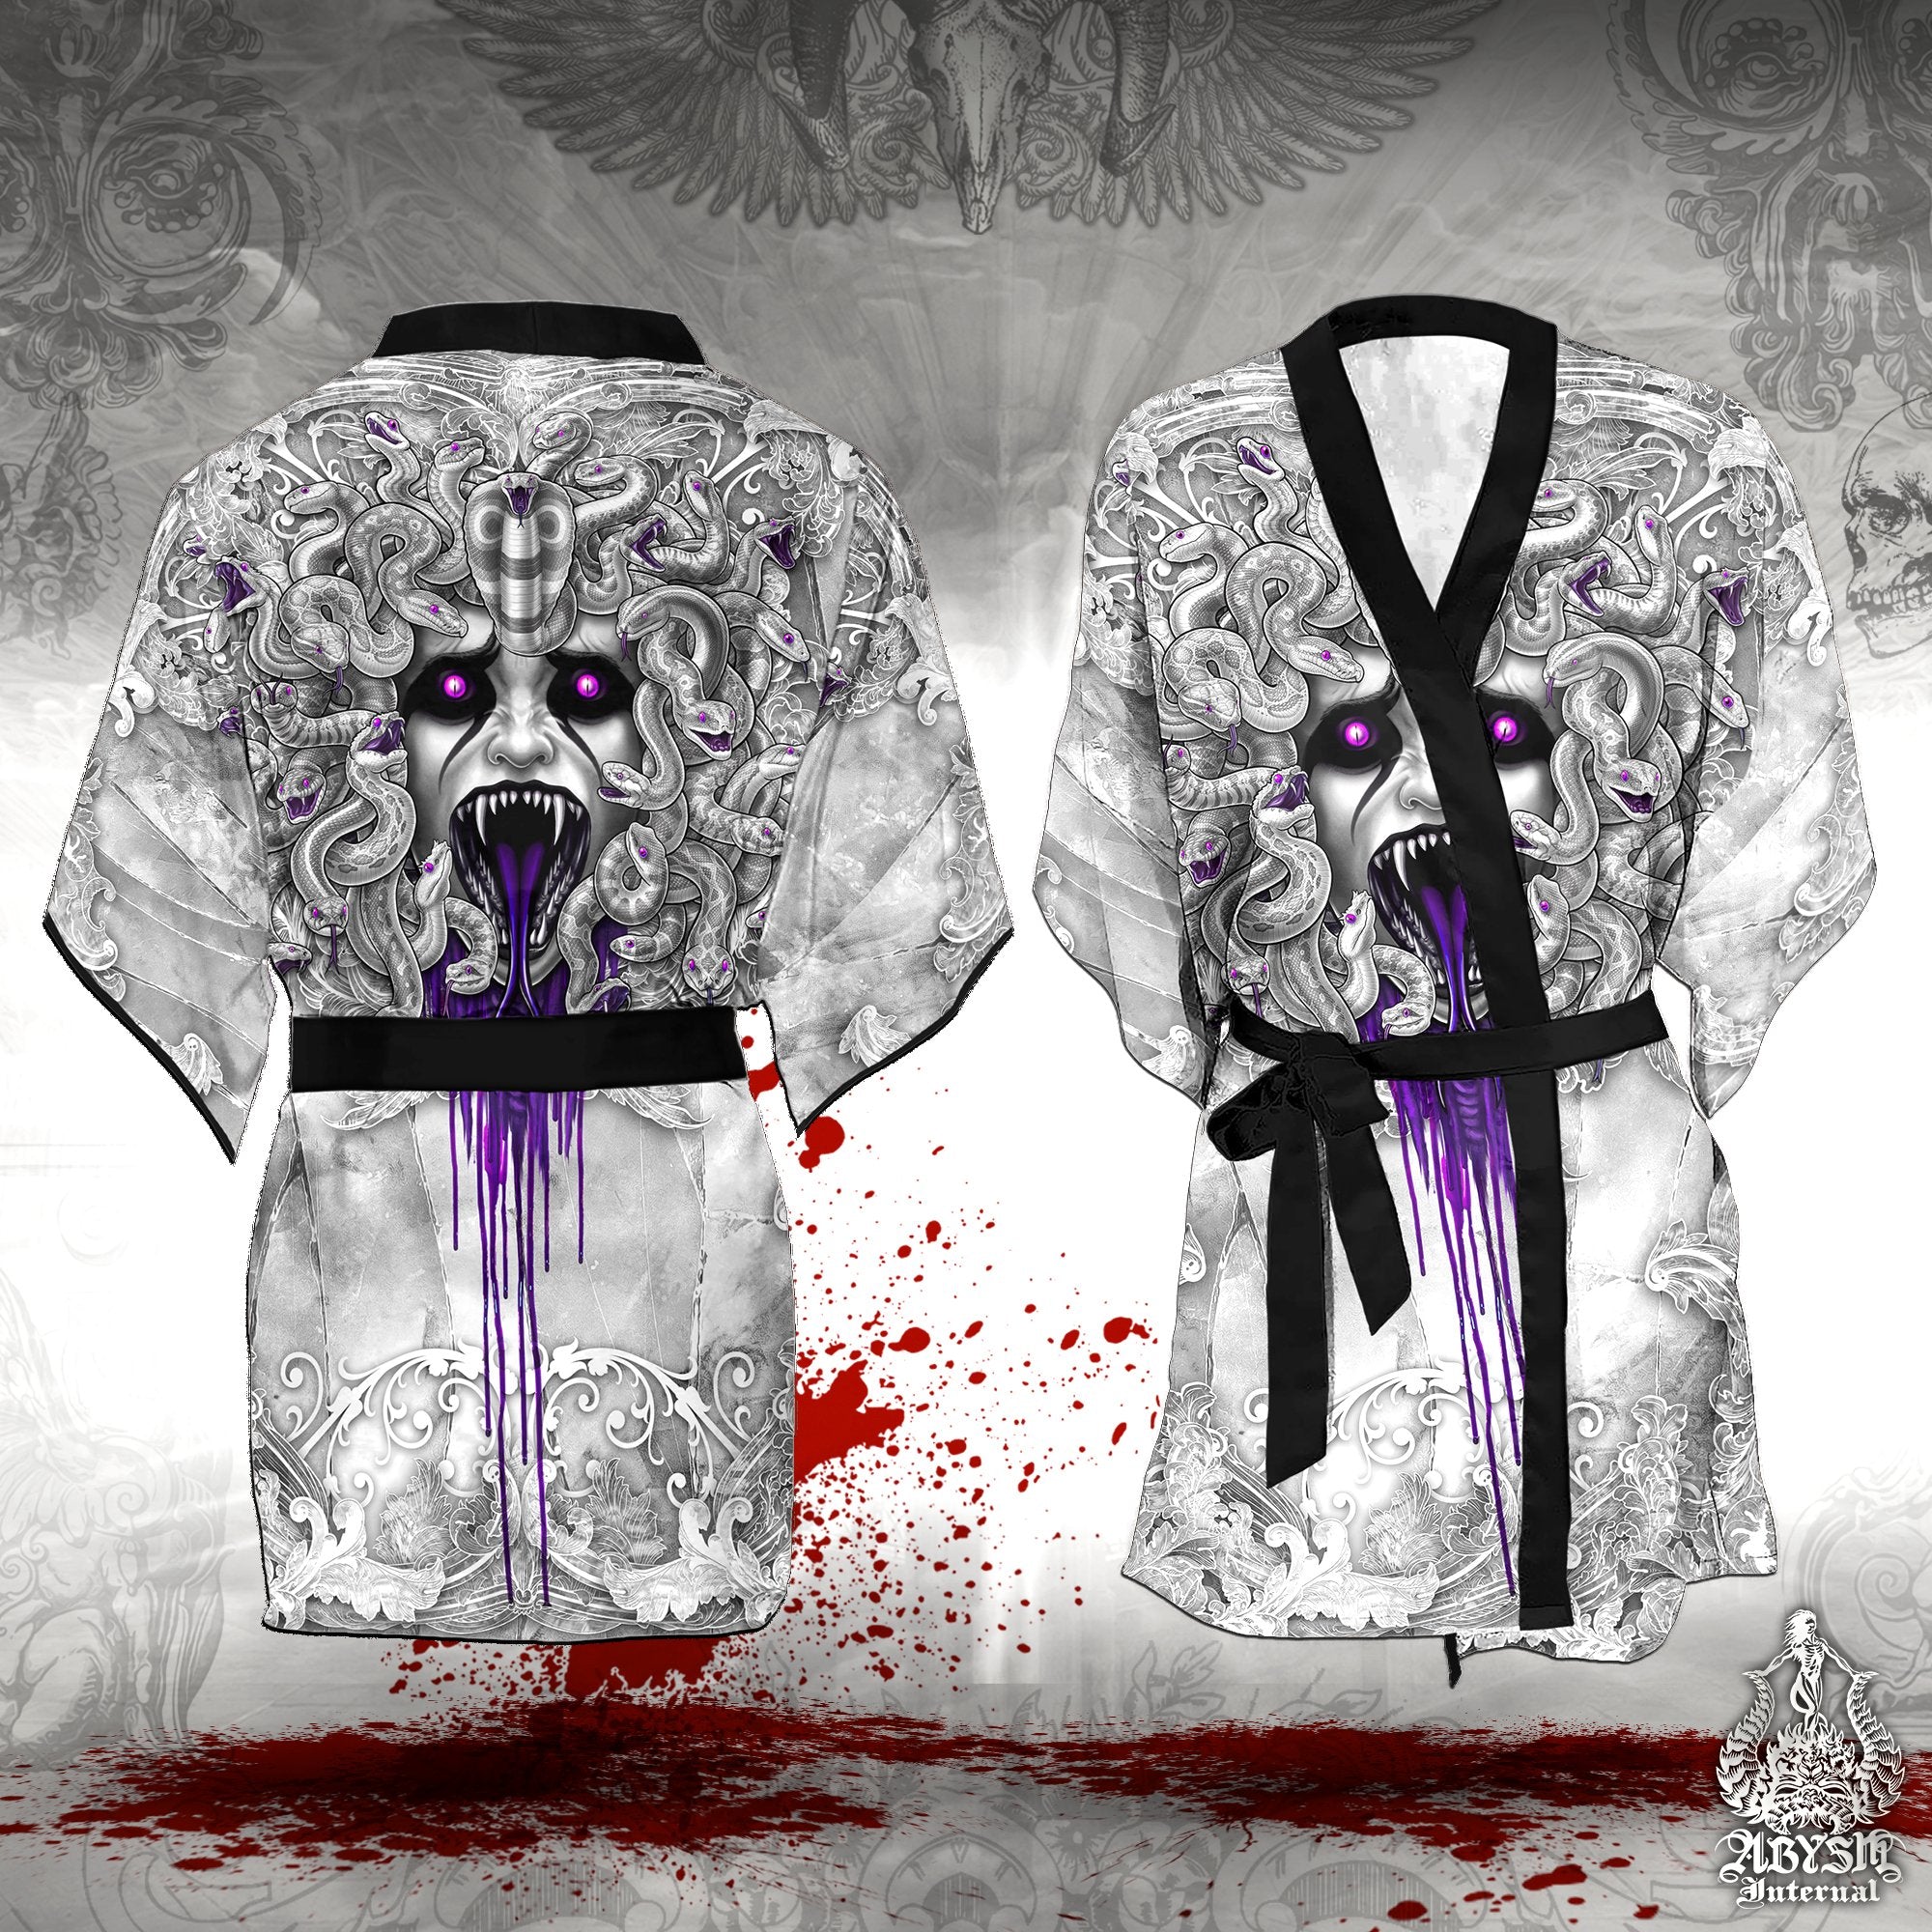 Skull Short Kimono Robe, Beach Party Outfit, Medusa Coverup, Summer Festival, Indie and Alternative Clothing, Unisex - White Goth Purple, 2 Faces - Abysm Internal